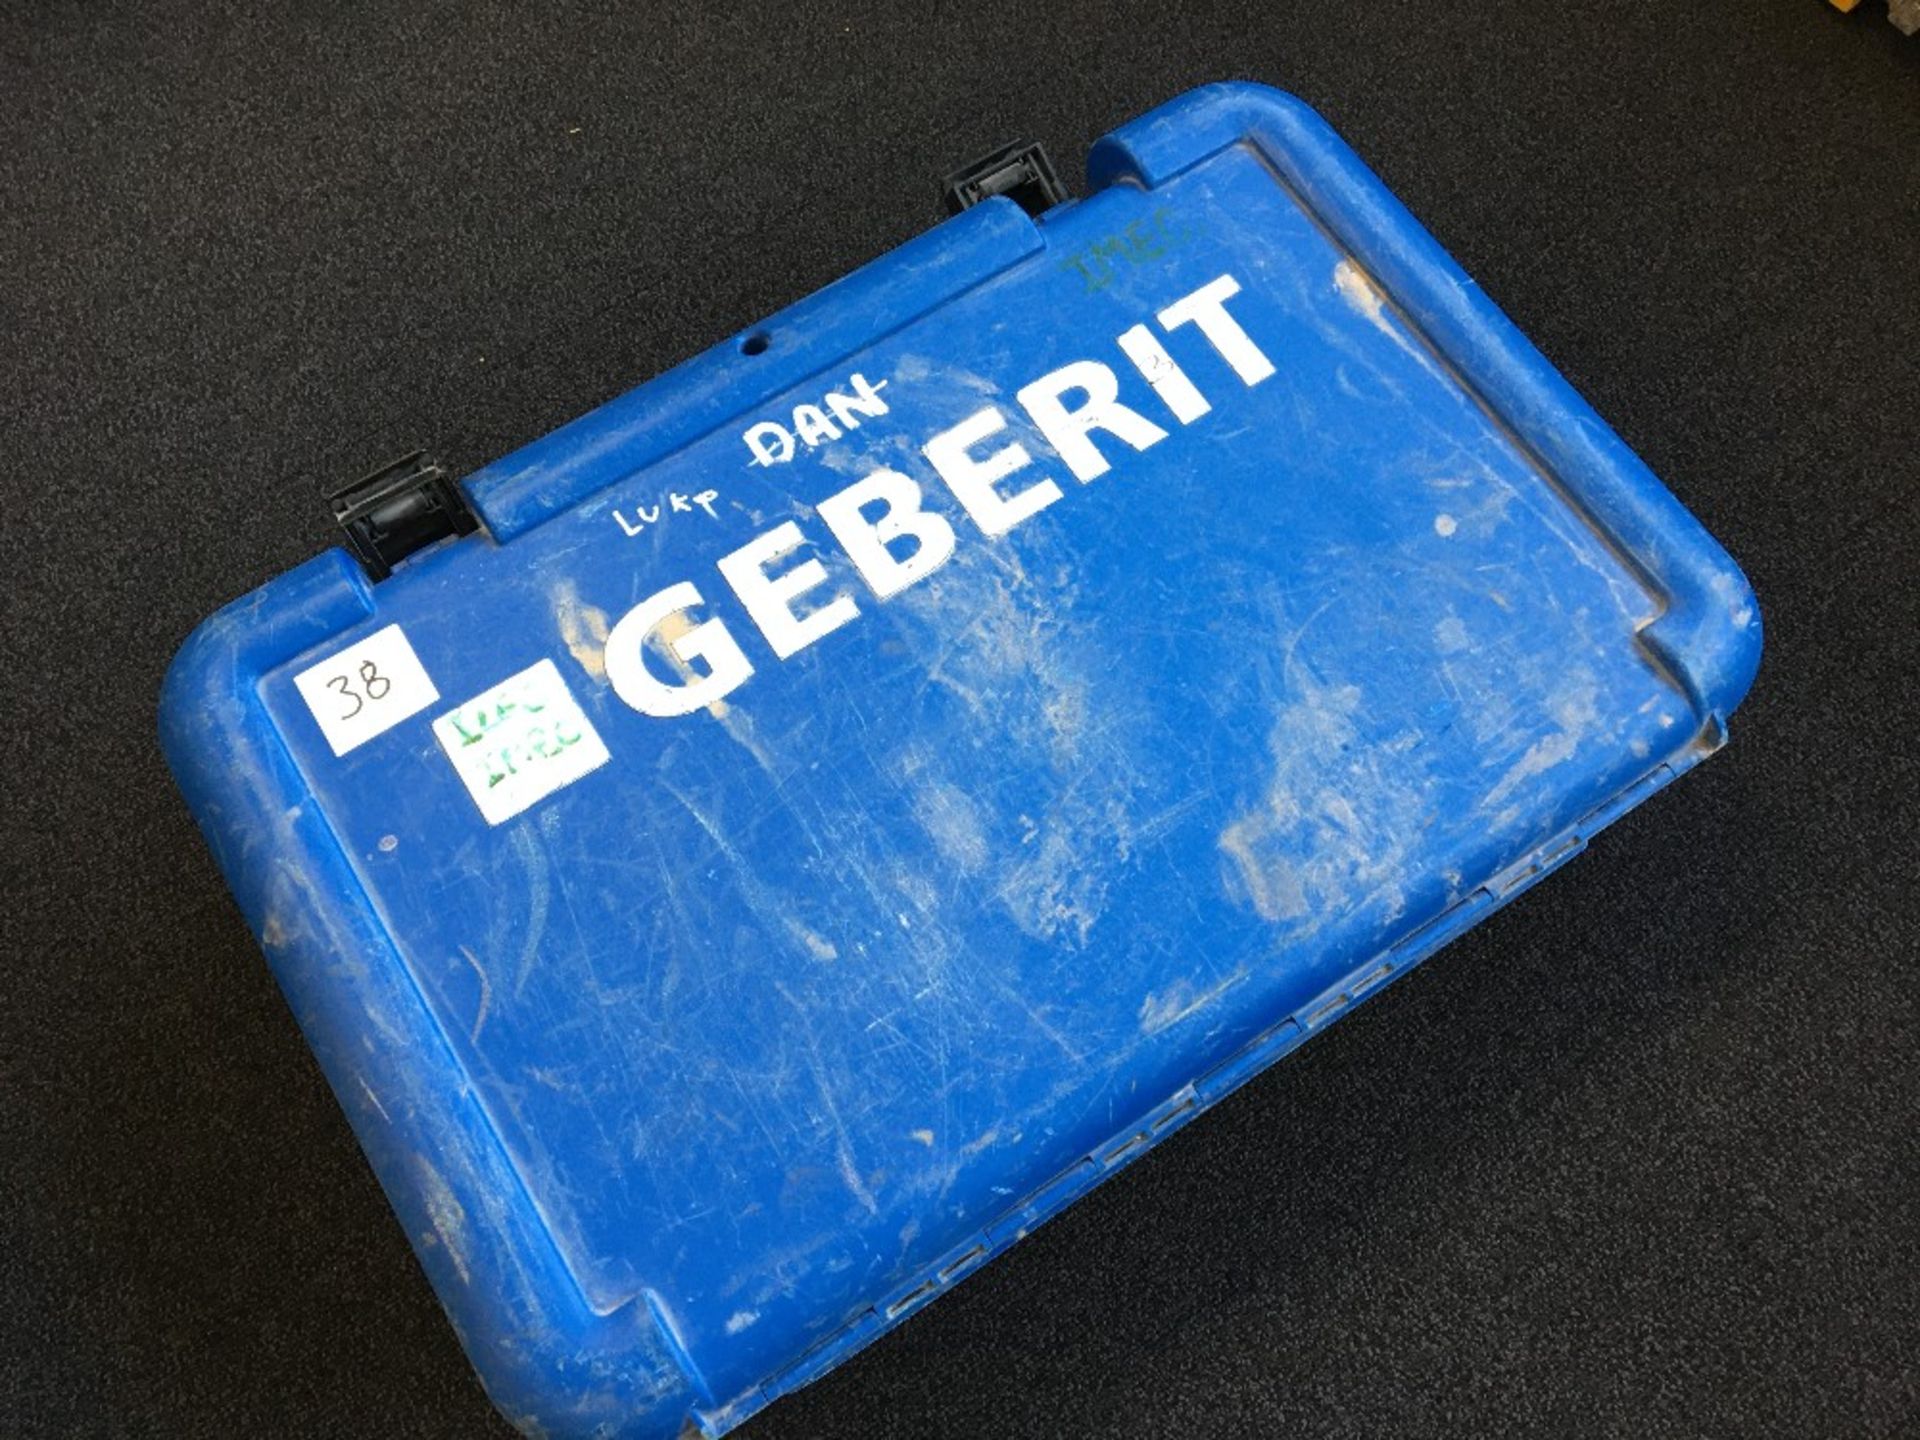 Gerberit AC0202XL Pressfit Gun - 15-35mm heads & battery and carry case - Image 2 of 6